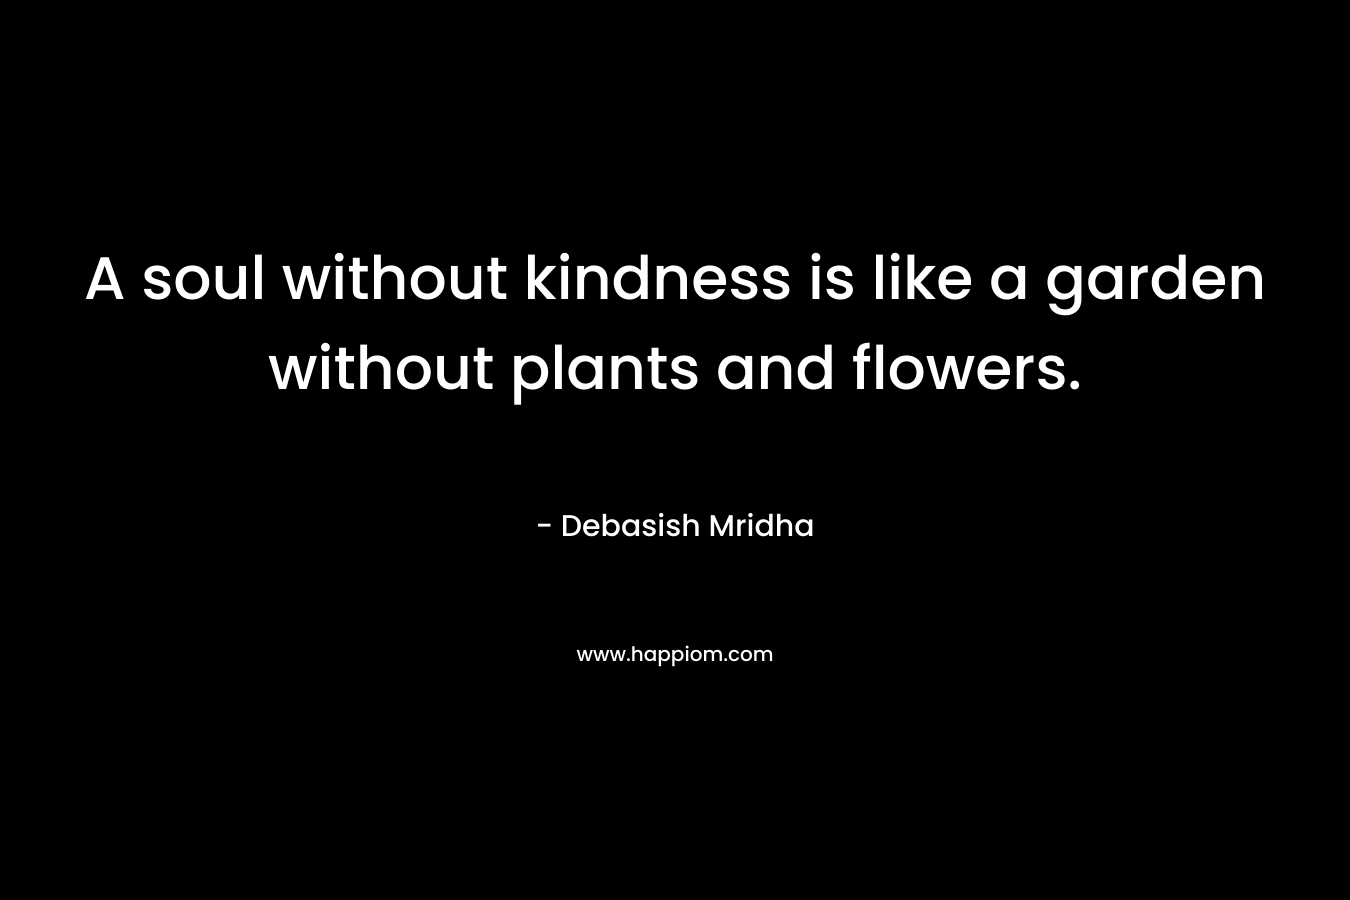 A soul without kindness is like a garden without plants and flowers. – Debasish Mridha